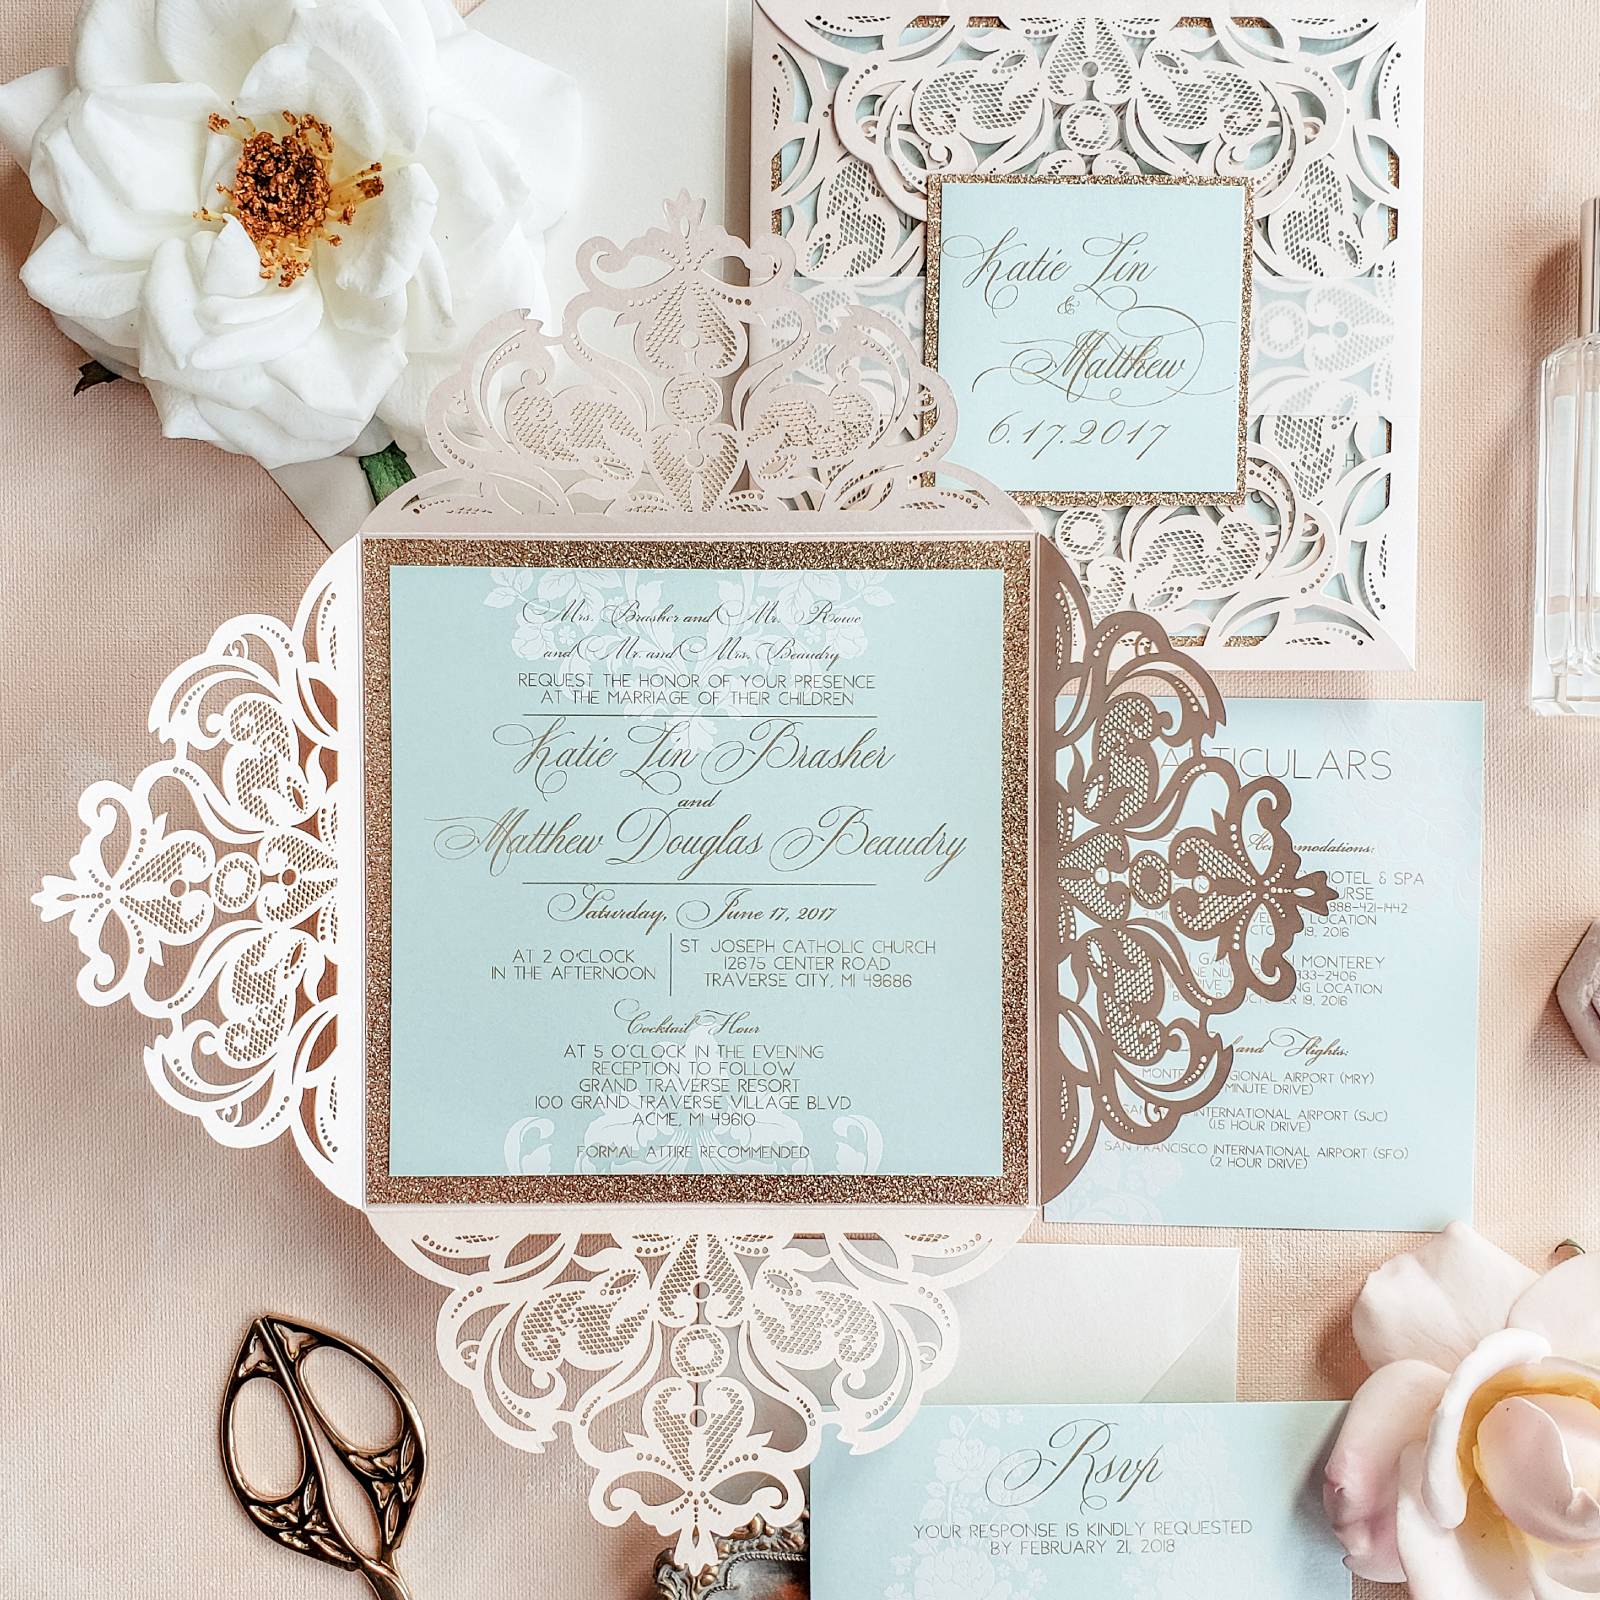 [vc_row][vc_column][vc_column_text]Purchase this listing to get a sample of our Begonia wedding invitation suite.

The sample includes:

• 6